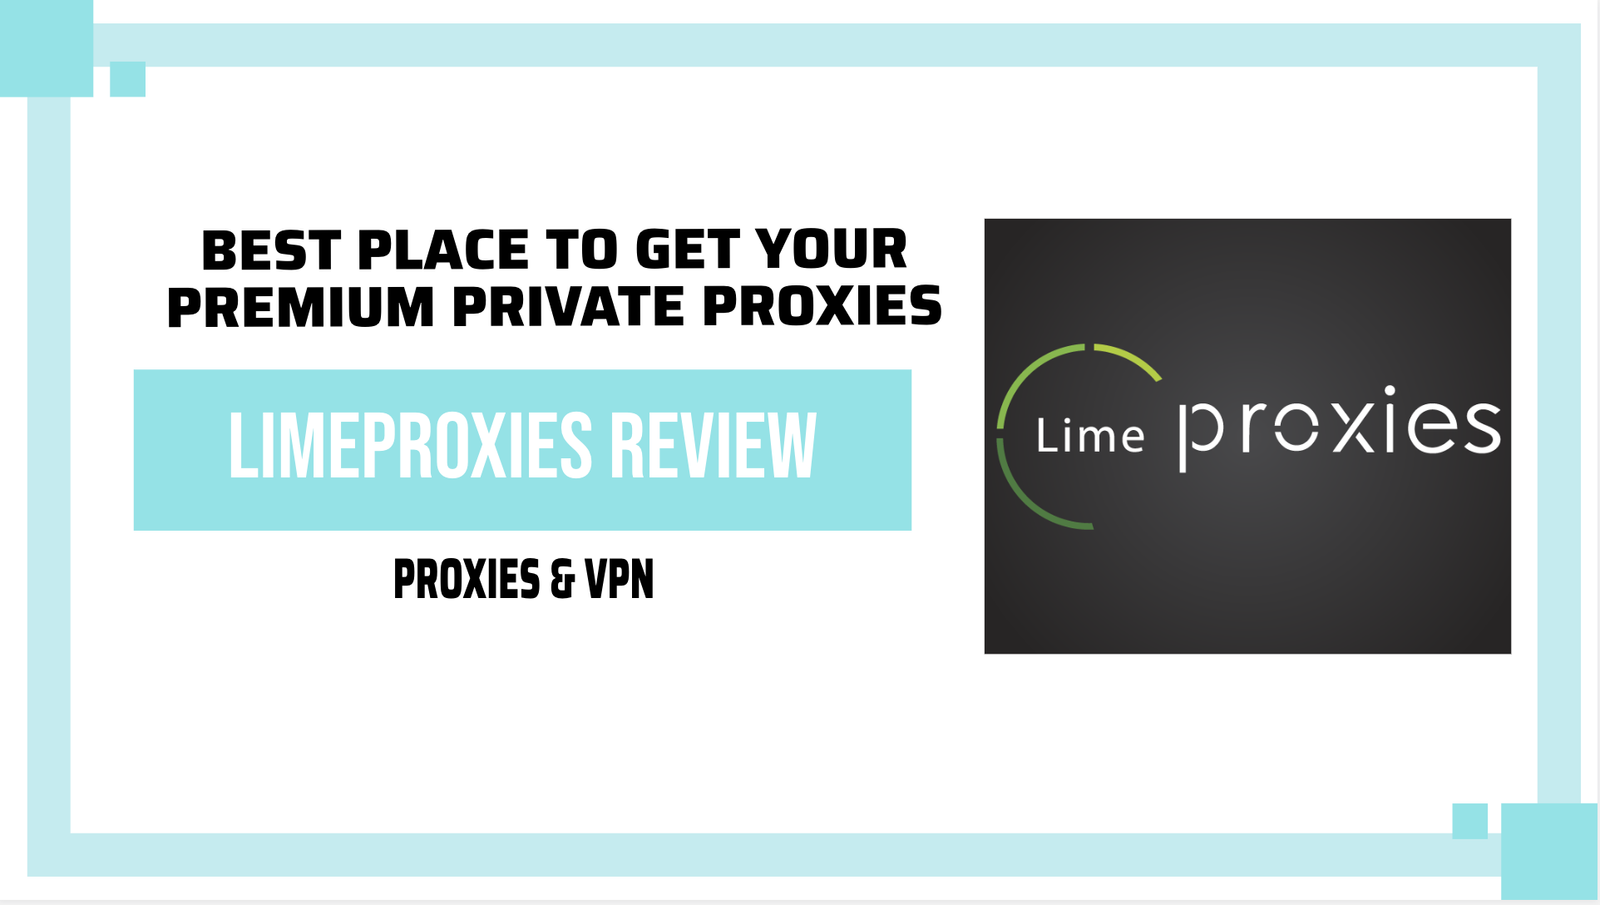 Lime-proxies-review